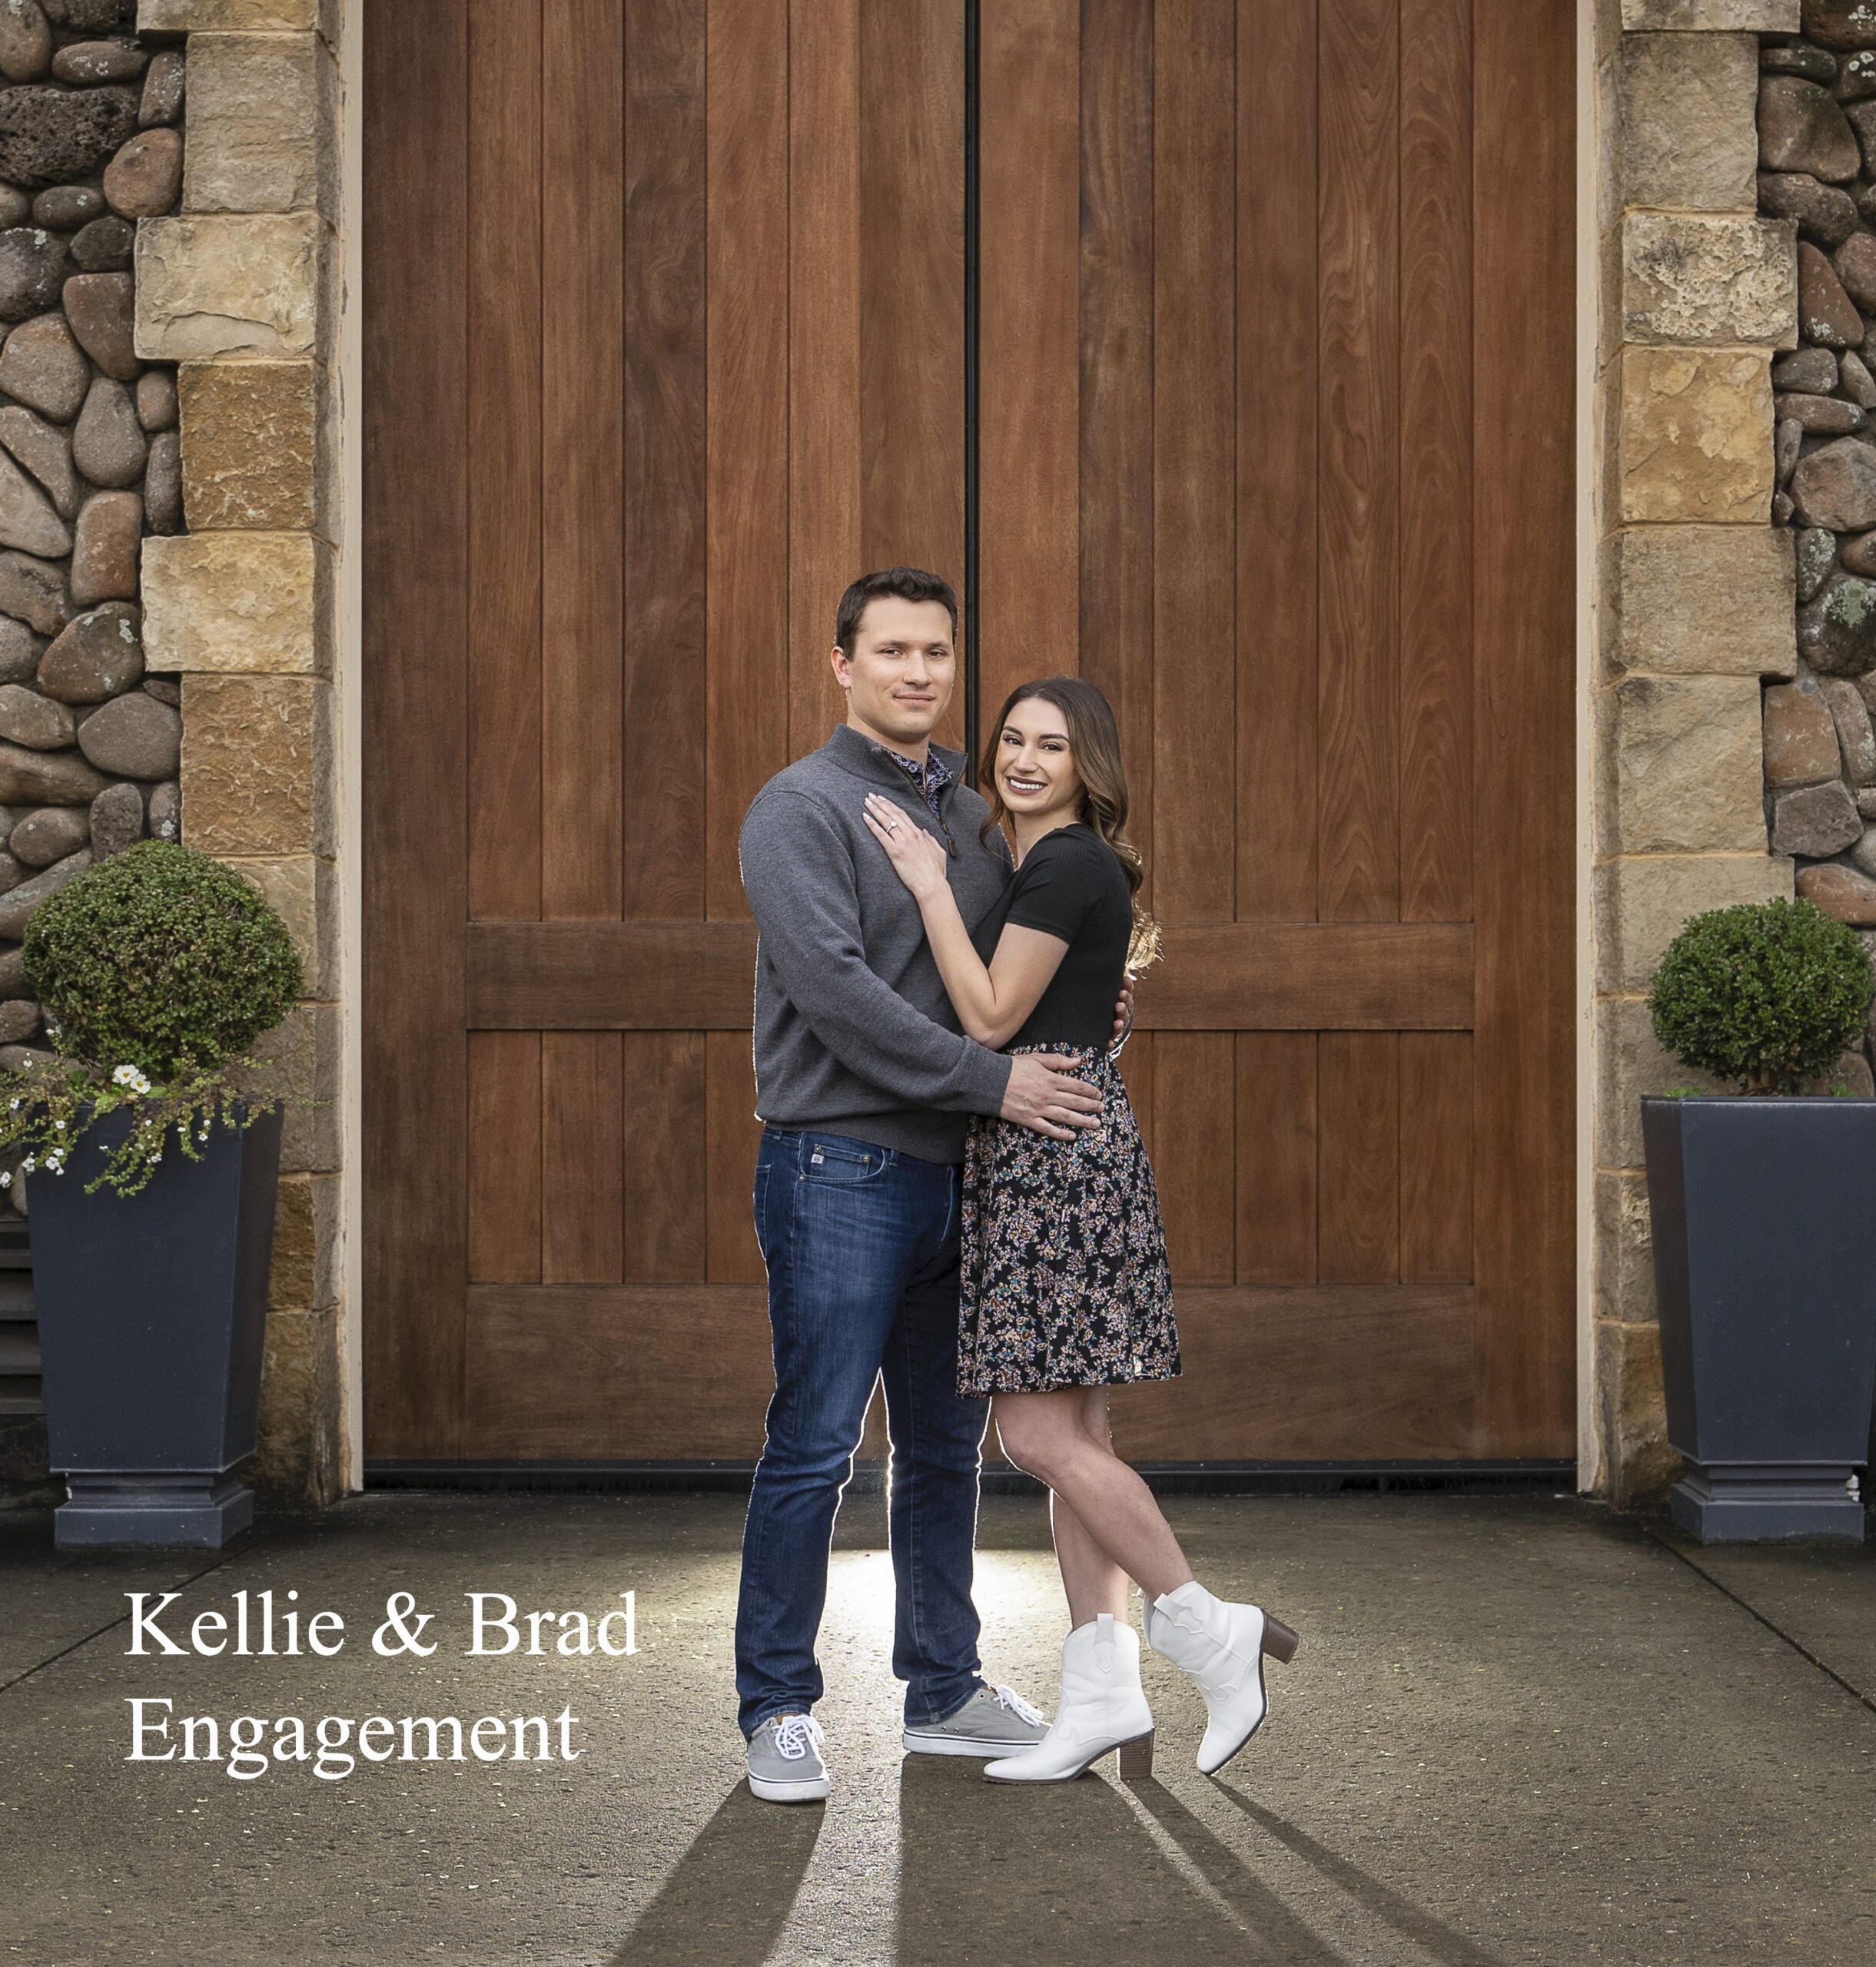 Kellie and bard engagement.